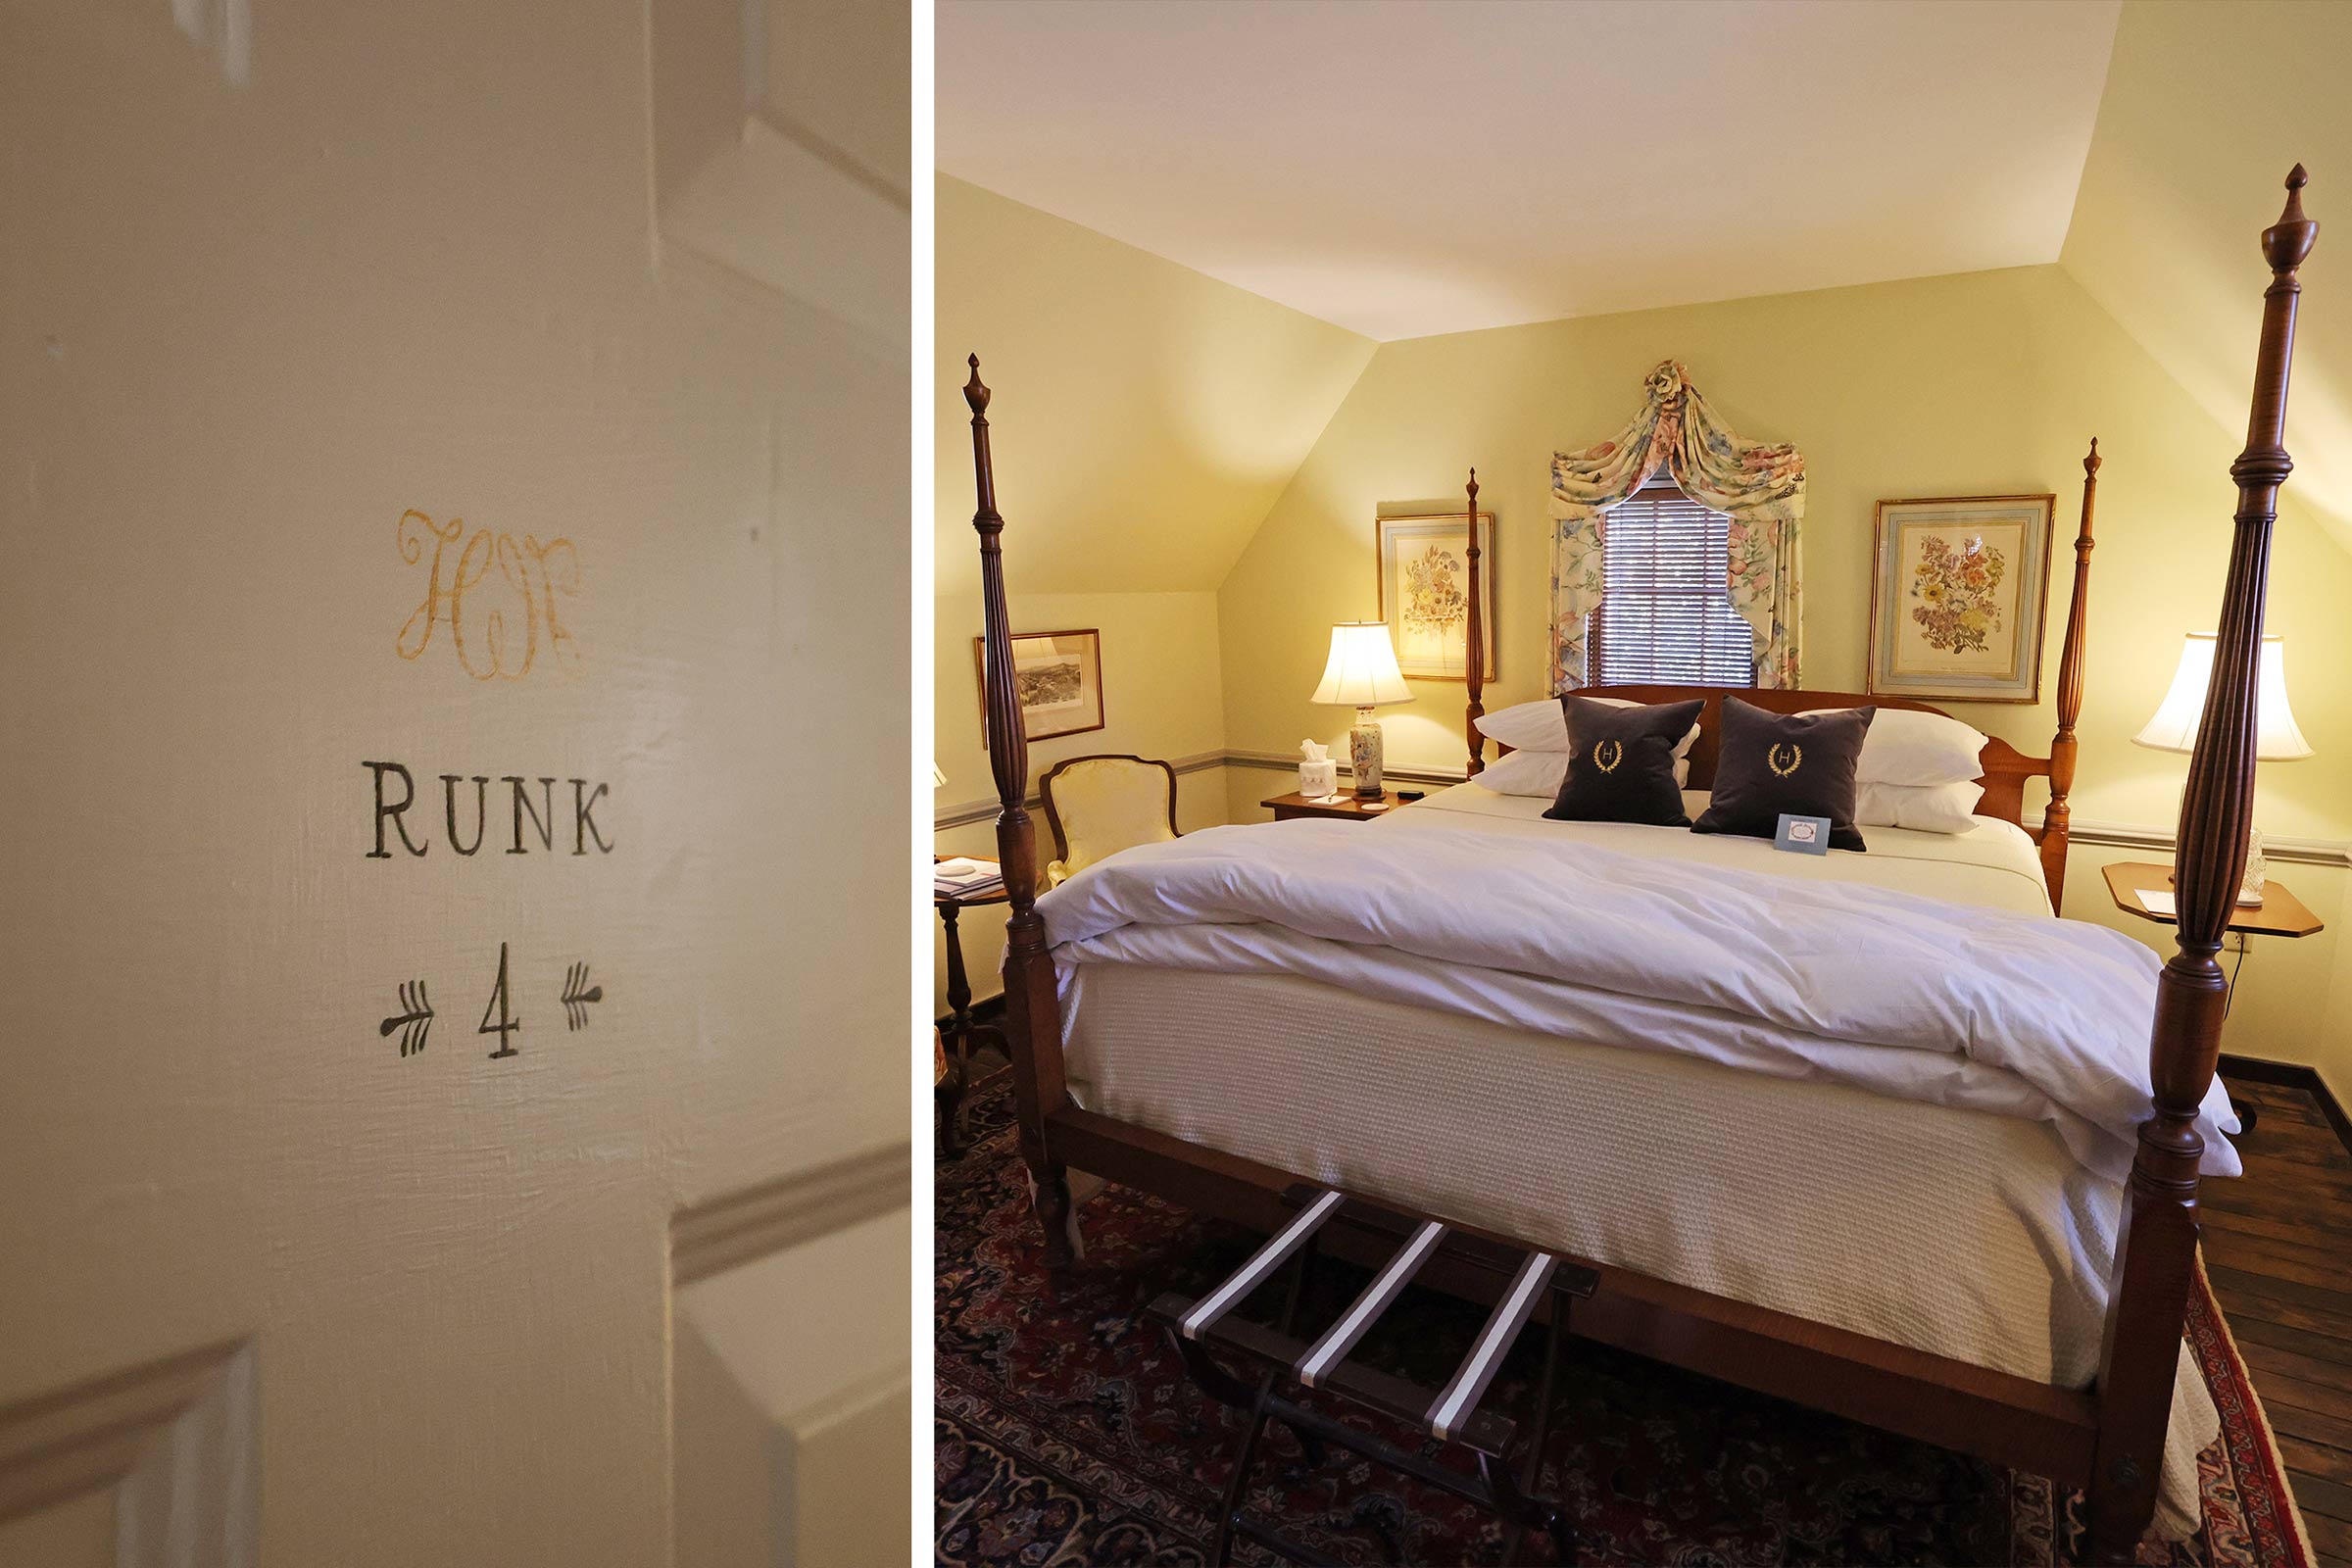 Left a close of the word Runk on the room door, right a photo of the four post bed in the Runk Room